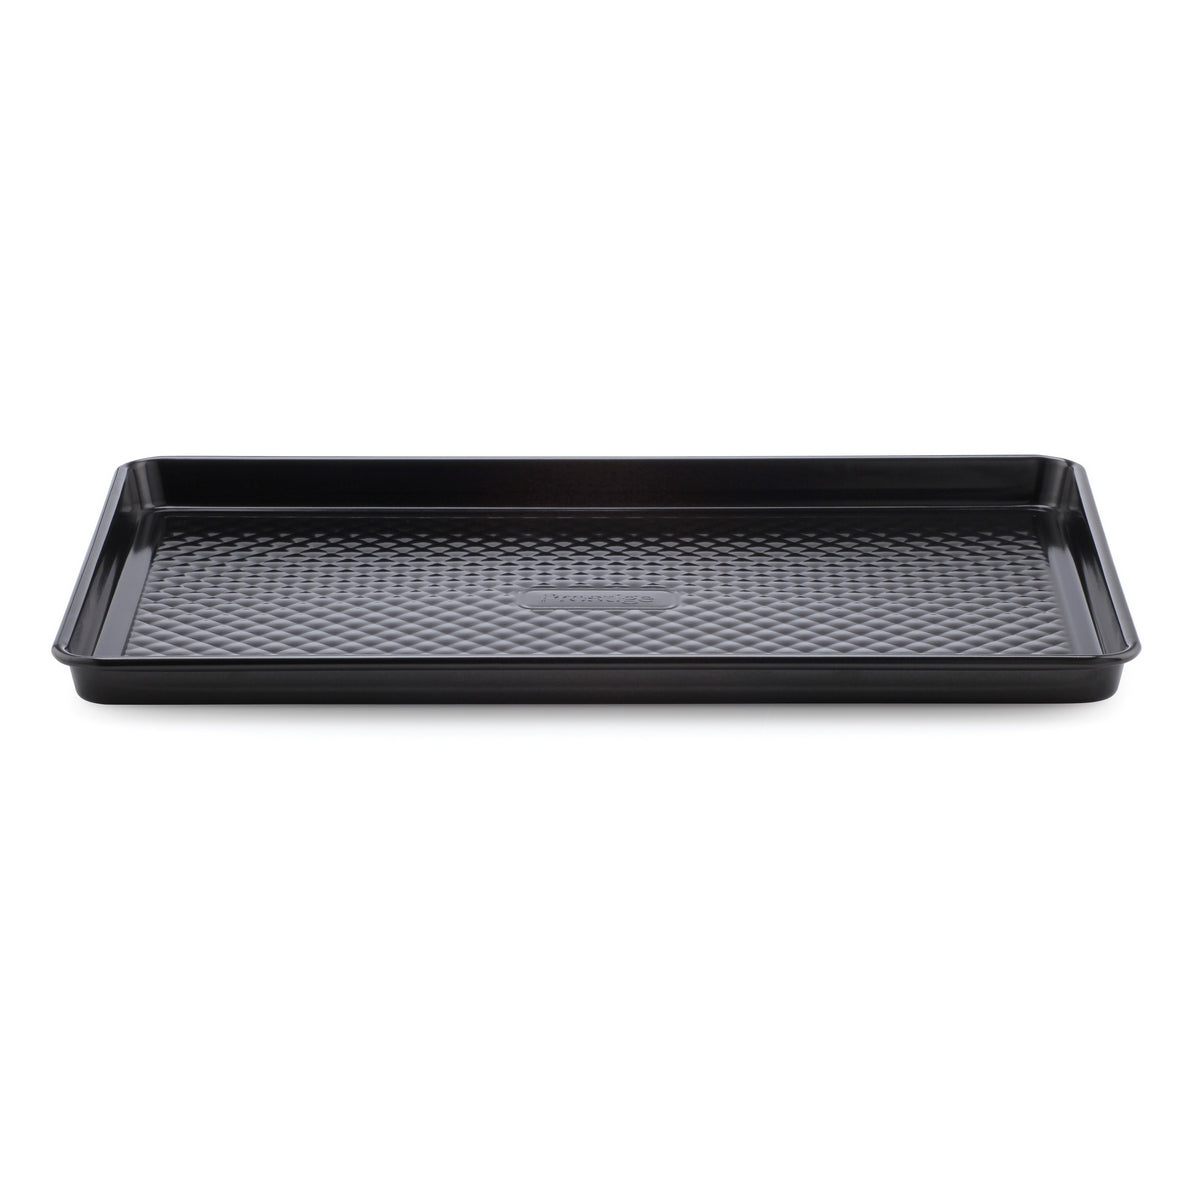 An image of Inspire Non-Stick Oven Tray Large